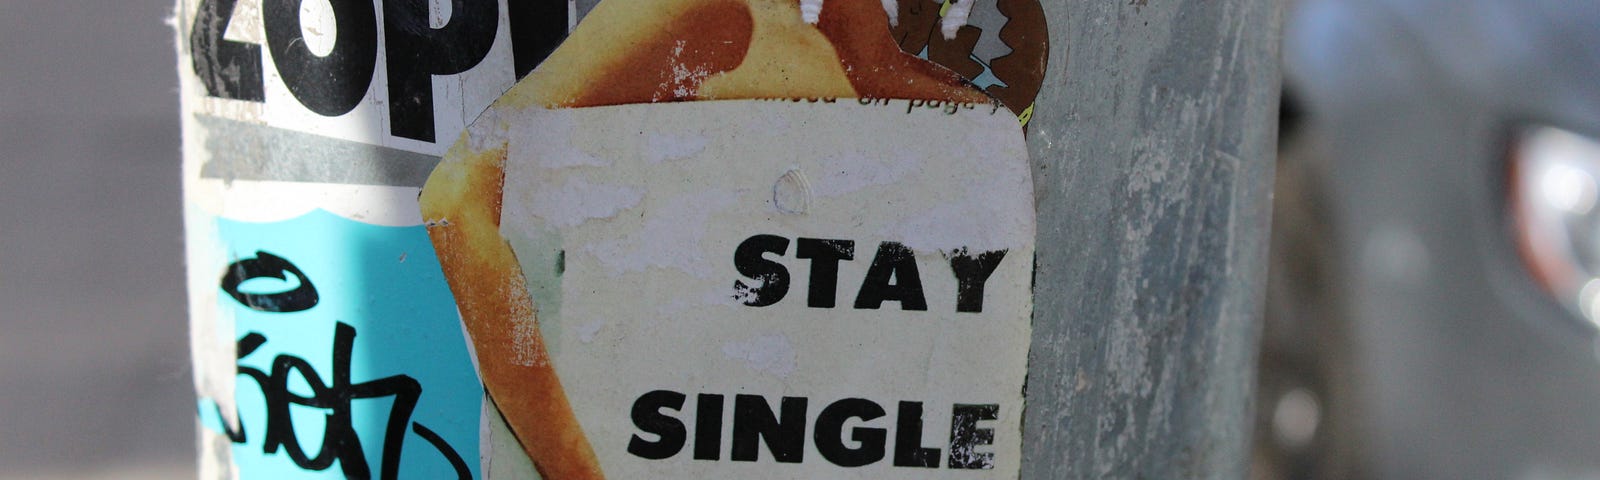 Image shows scraps of paper plastered to a post. One of them says “Stay Single”